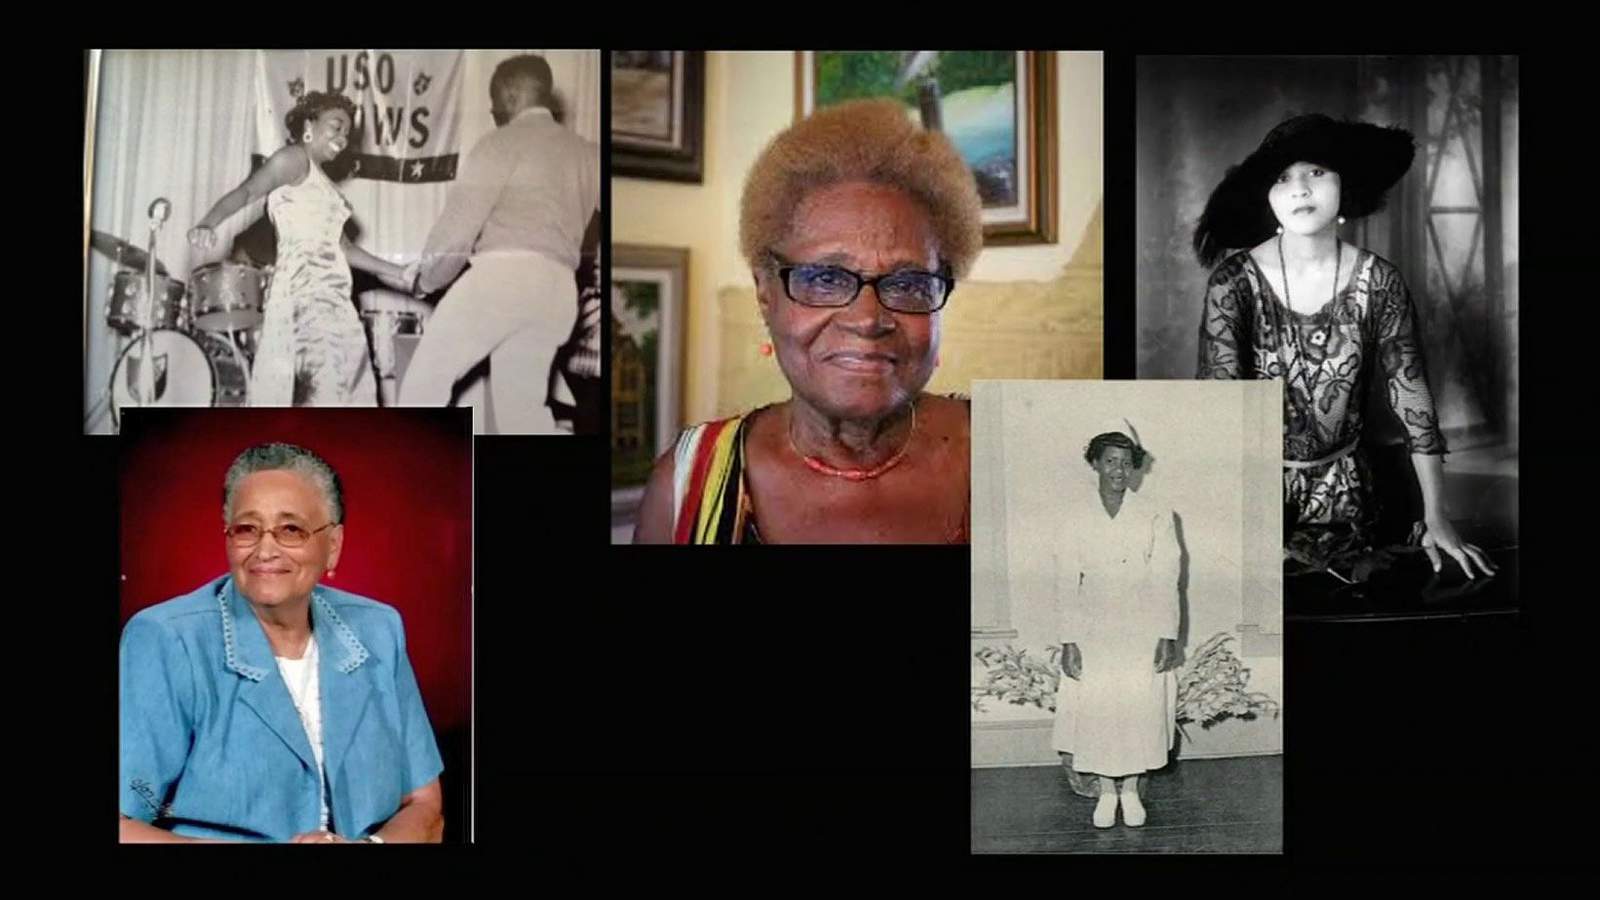 5 prominent Black women to be featured in Lincolnville museum exhibit